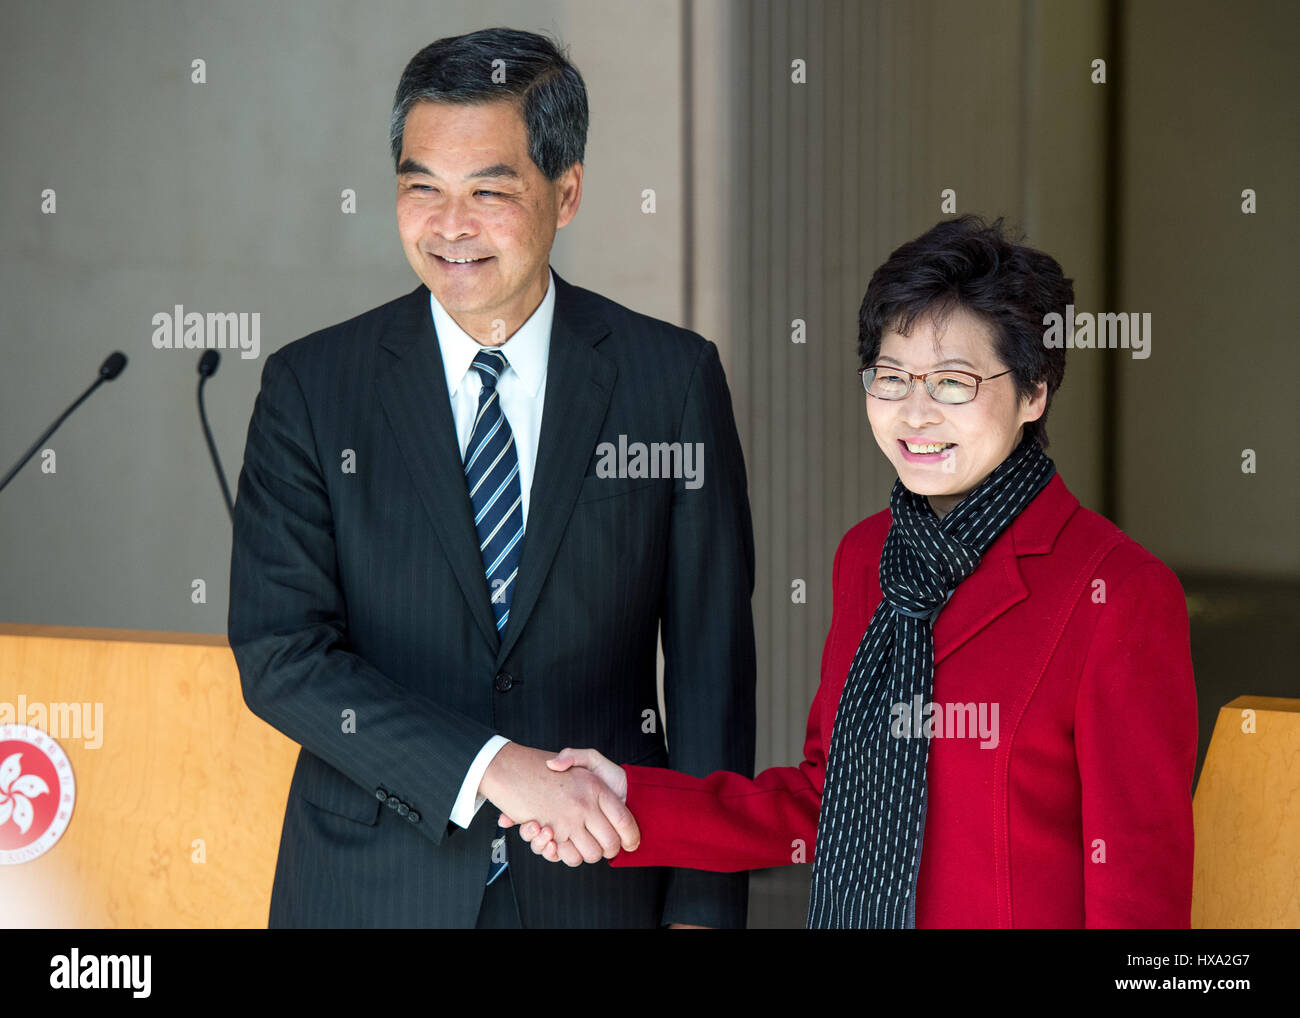 Hong Kong, Hong Kong, China. 27th Mar, 2017. The Chief Executive of Hong Kong, CY Leung (L), meets with the Chief Executive Elect, CARRIE LAM. Carrie Lam won the election with 777 votes out of the 1,194 eligible votes making her the city's first female leader. Credit: Jayne Russell/ZUMA Wire/Alamy Live News Stock Photo